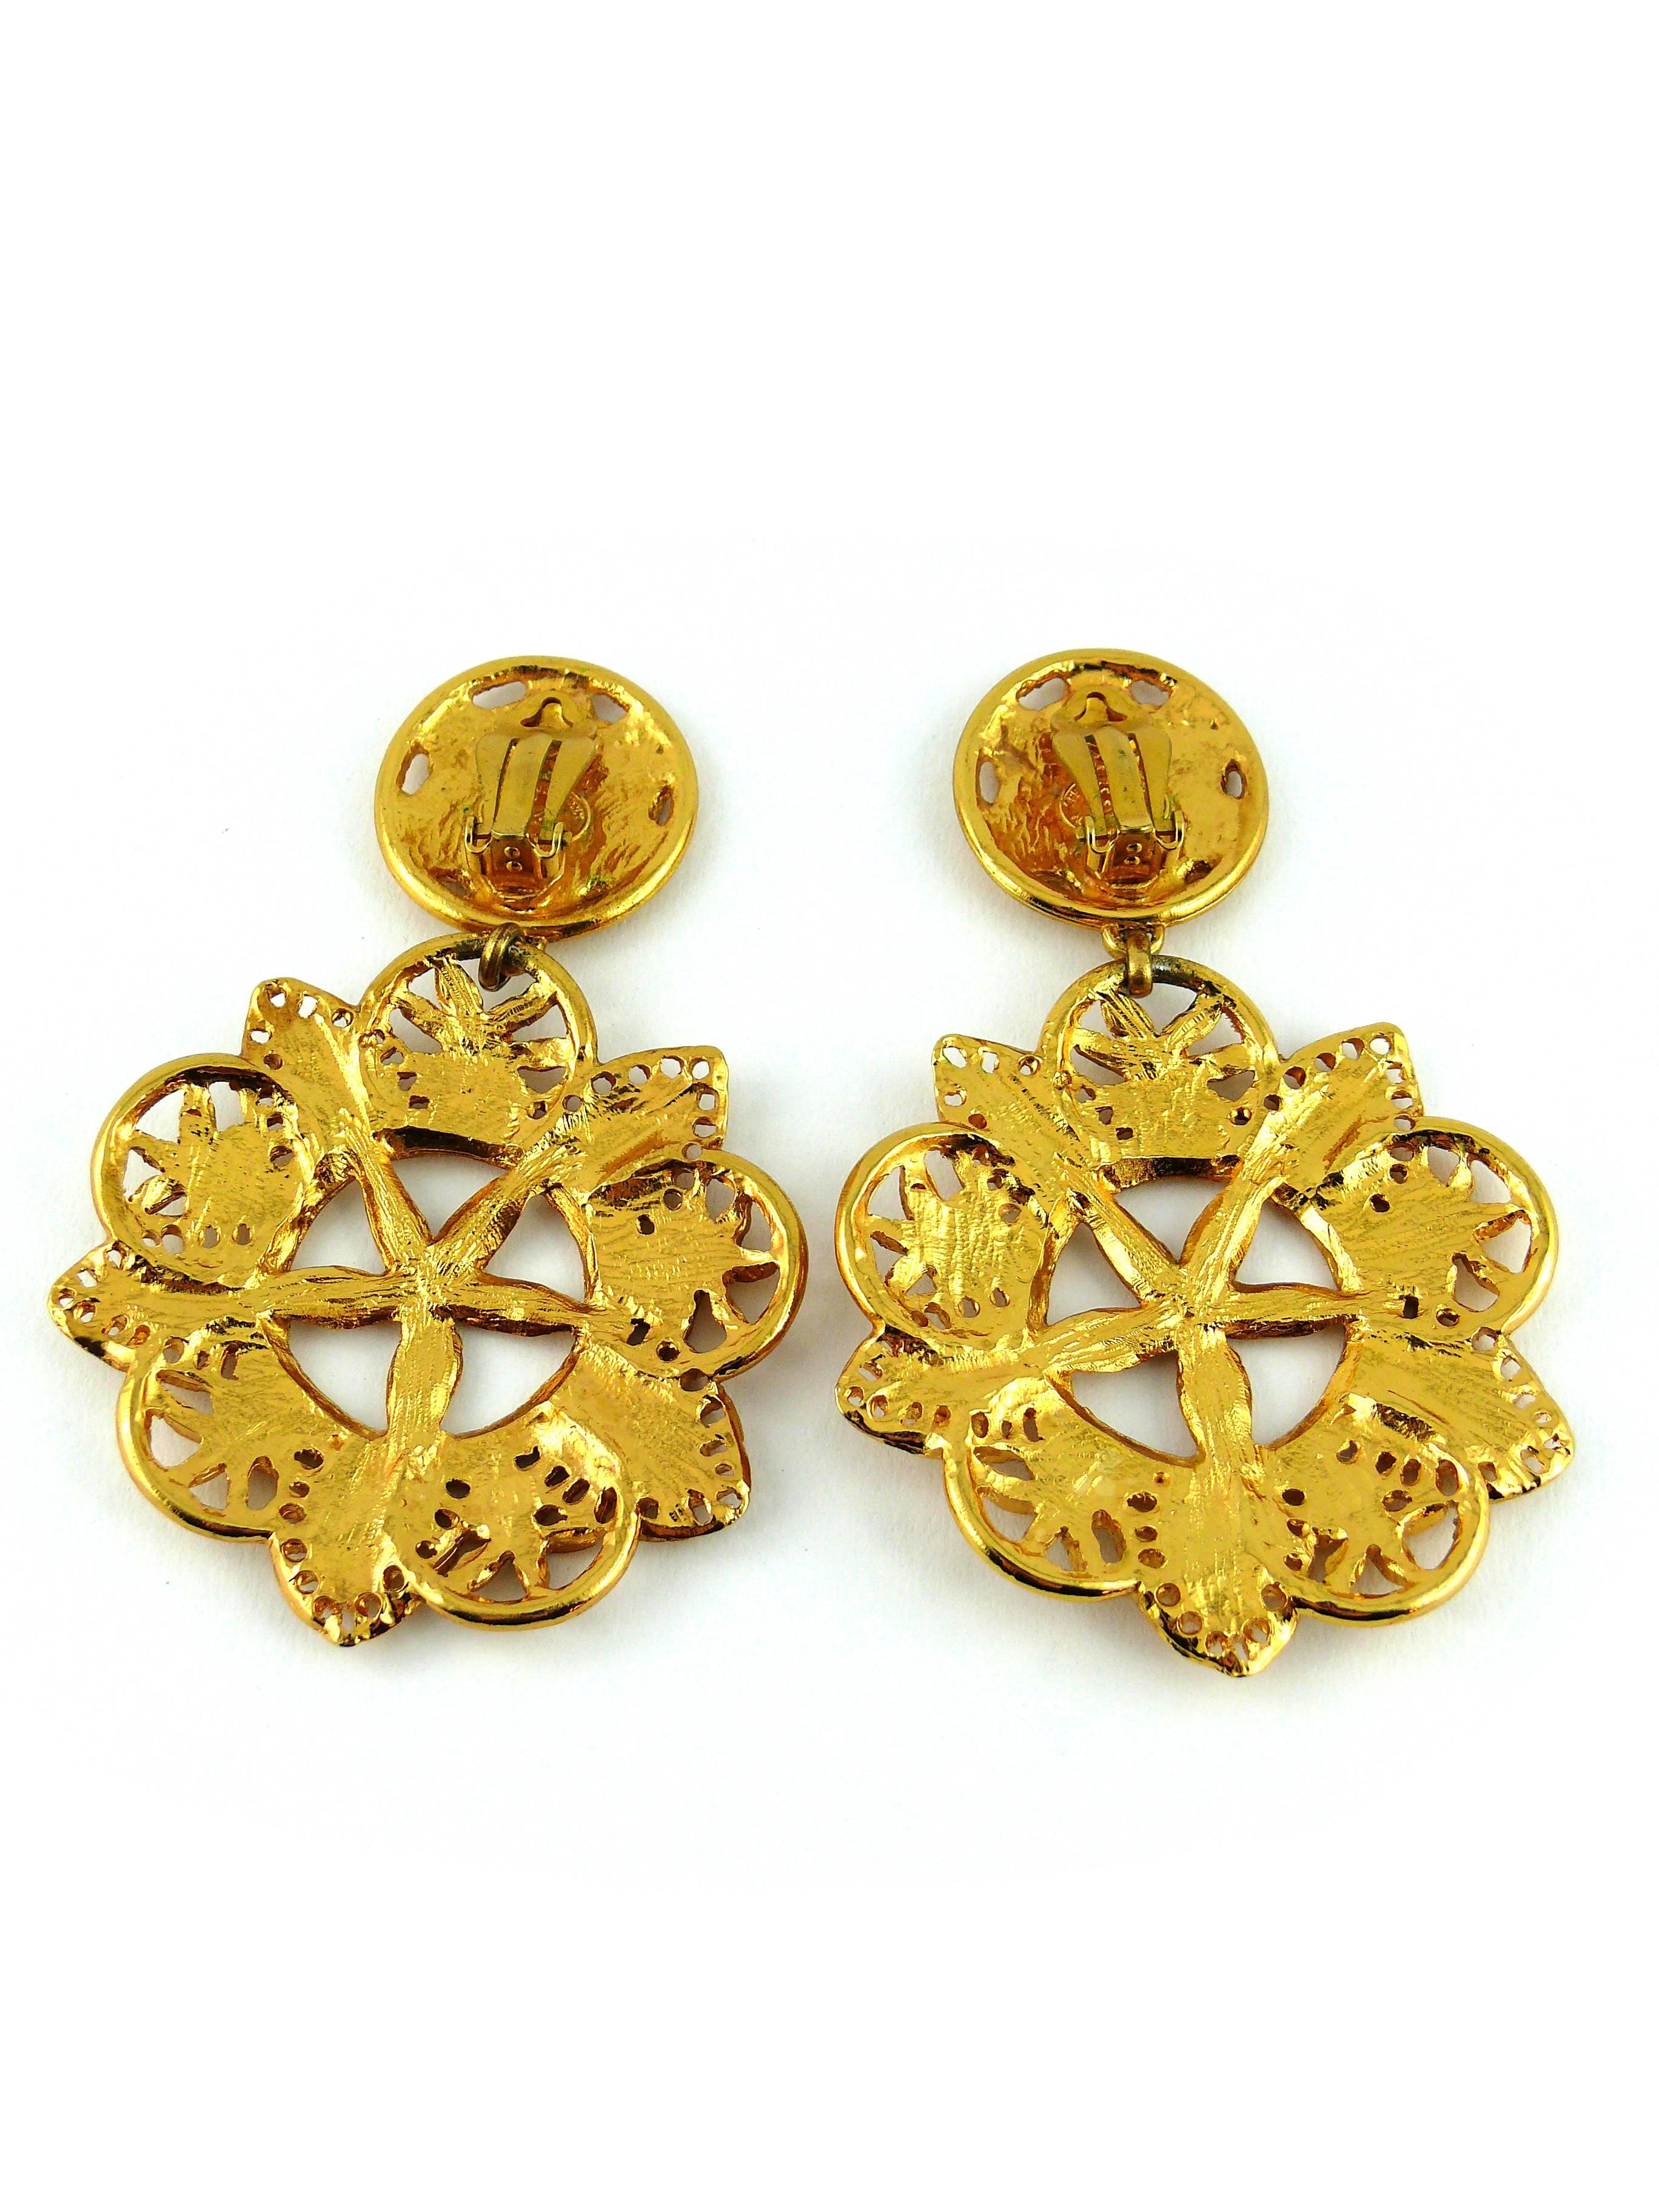 Christian Lacroix Vintage Massive Gold Toned Openwork Abstract Floral Earrings 2